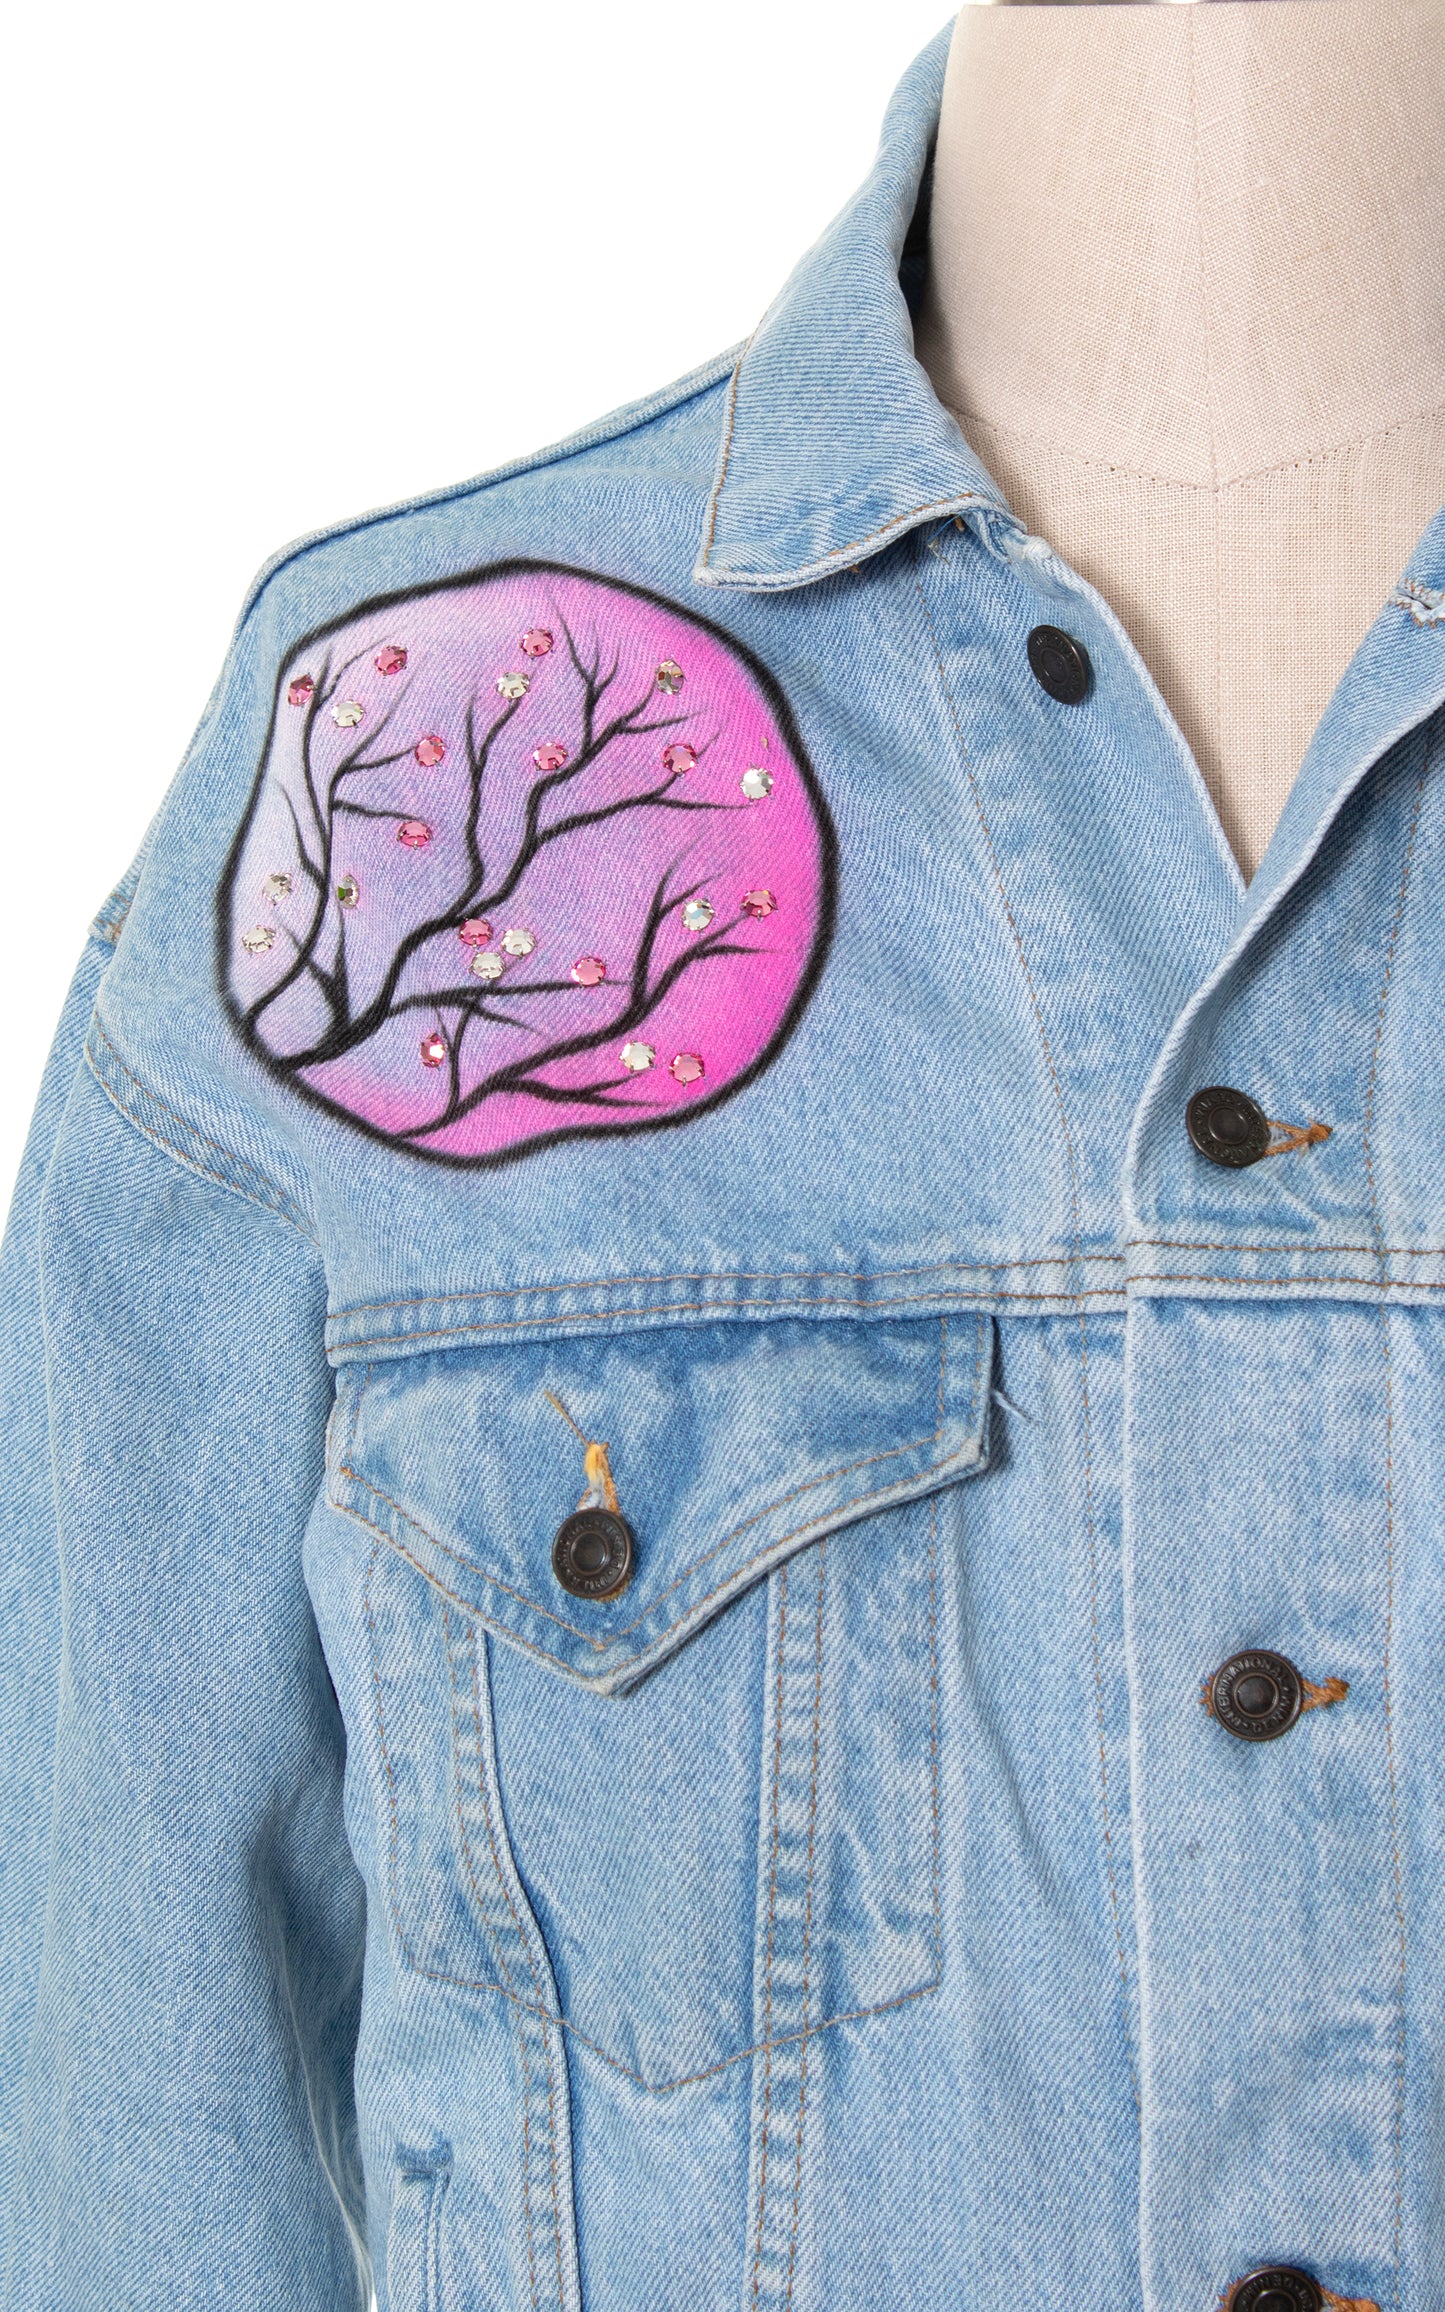 1990s Cat Novelty Print Hand-Painted Jean Jacket | large/x-large